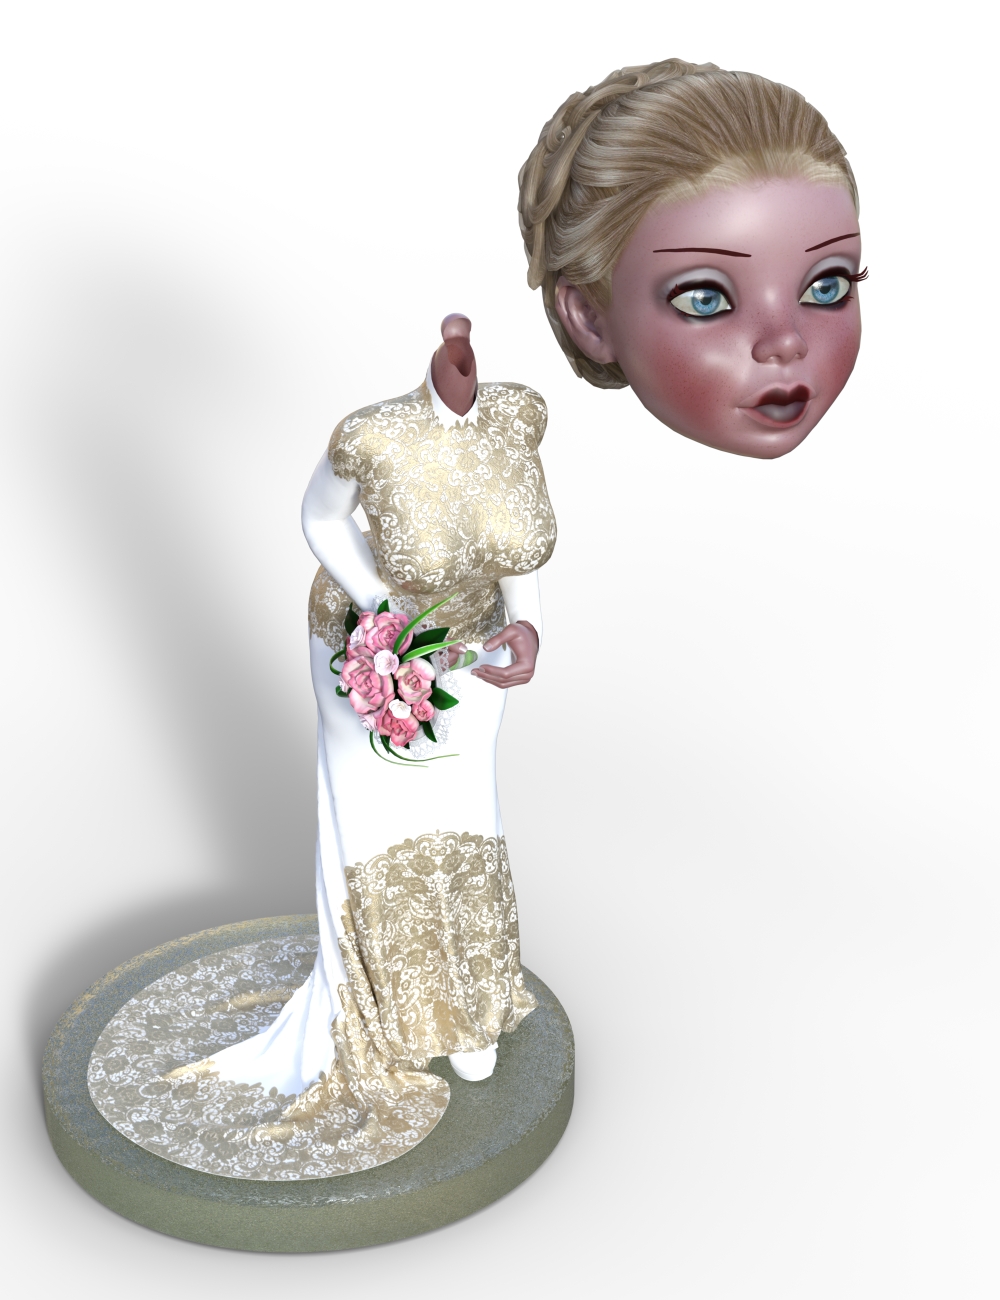 BobbleHead Bride showing both parts, by L'Adair